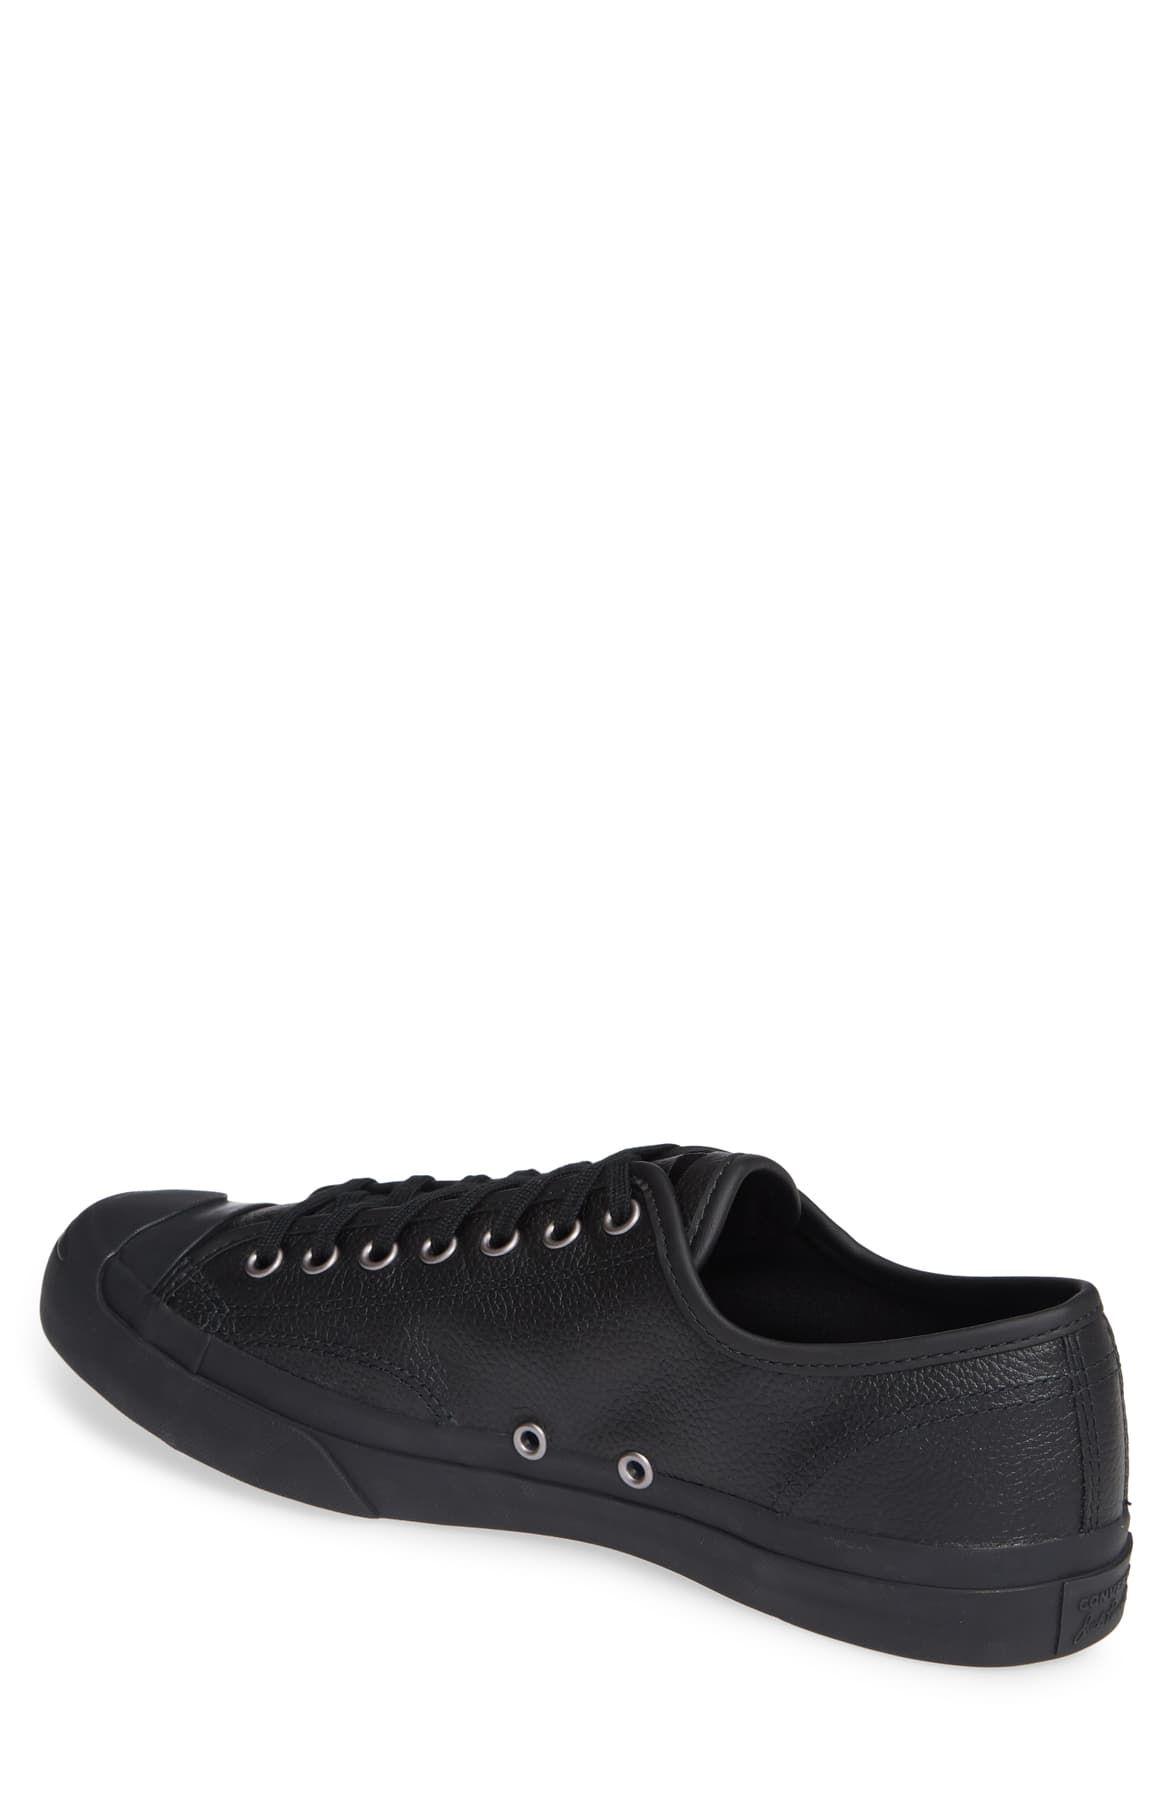 Converse Leather Jack Purcell Jack 